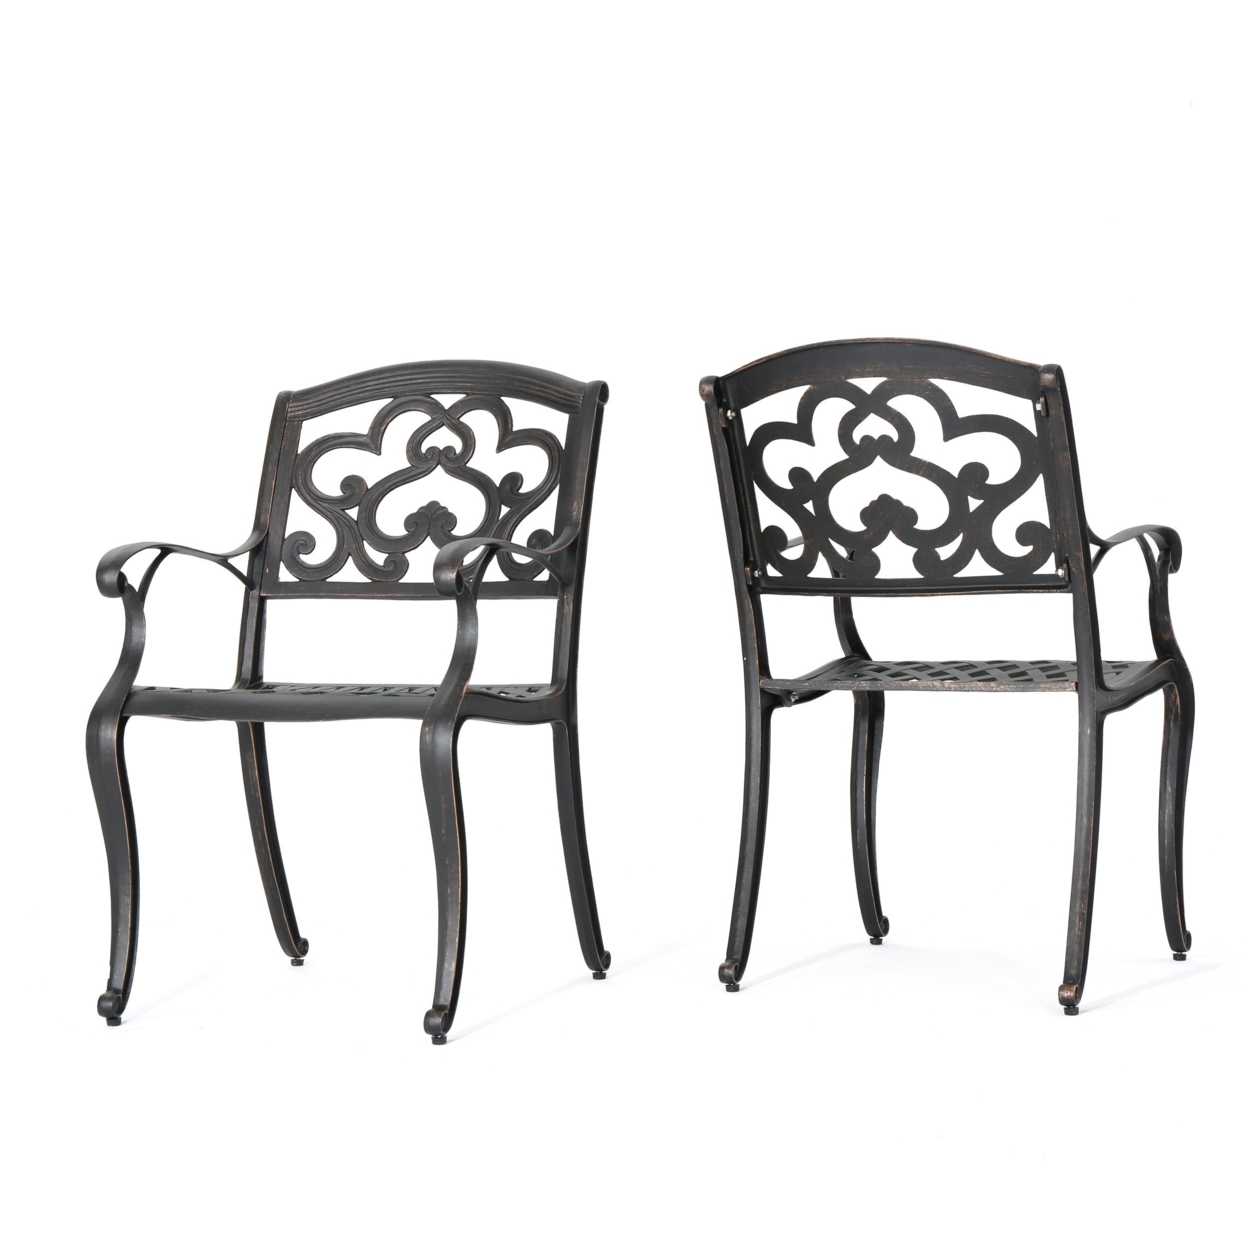 Augusta Outdoor Cast Aluminum Dining Chairs (Set Of 2)